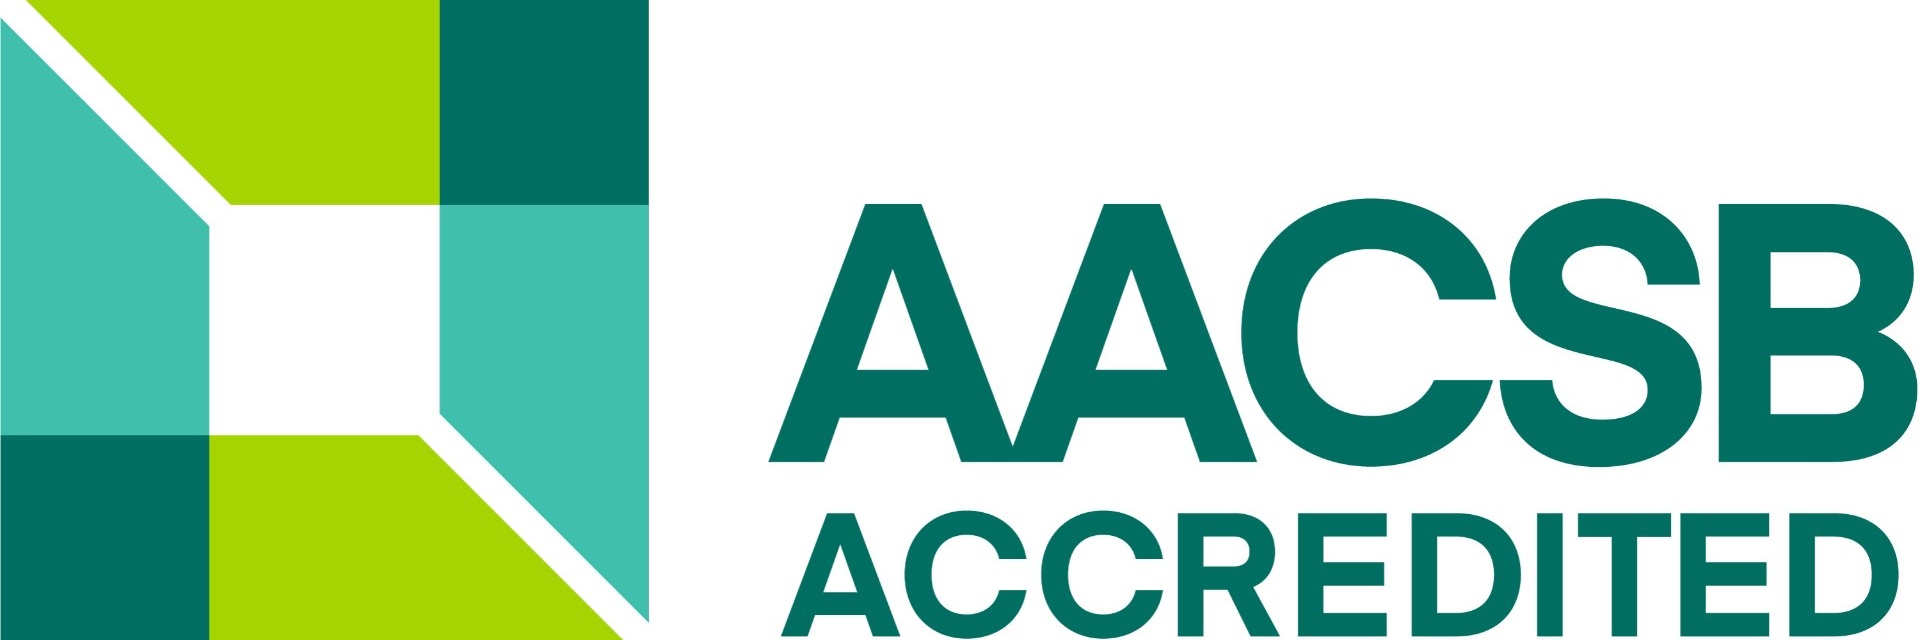 AACSB Accredited logo. 